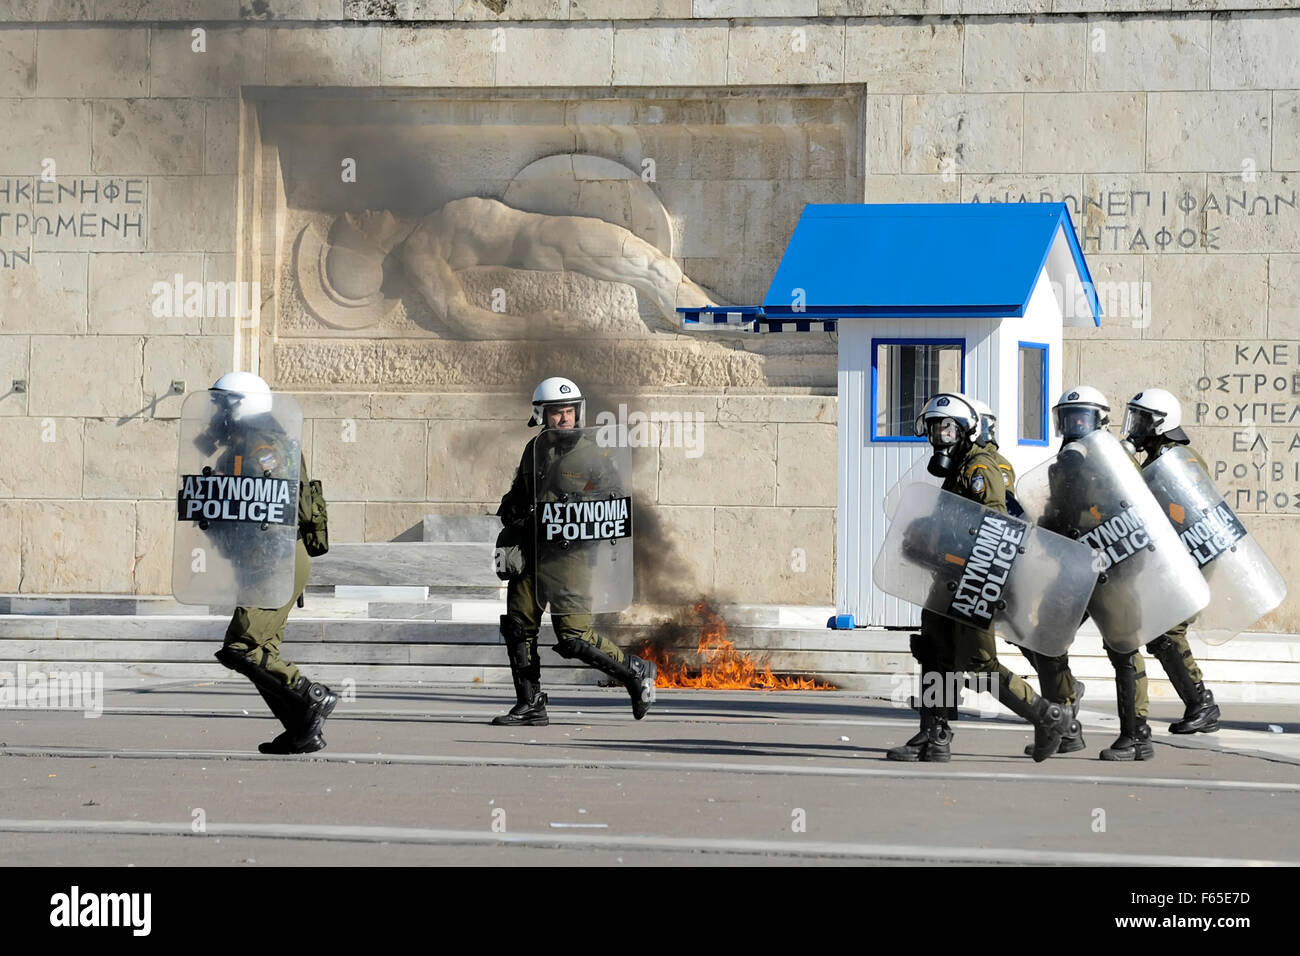 Athens, Greece, November, 12 2015: Clashes have broken out between riot police and youths at a demonstration in central Athens during the general strike. Credit:  VASILIS VERVERIDIS/Alamy Live News Stock Photo